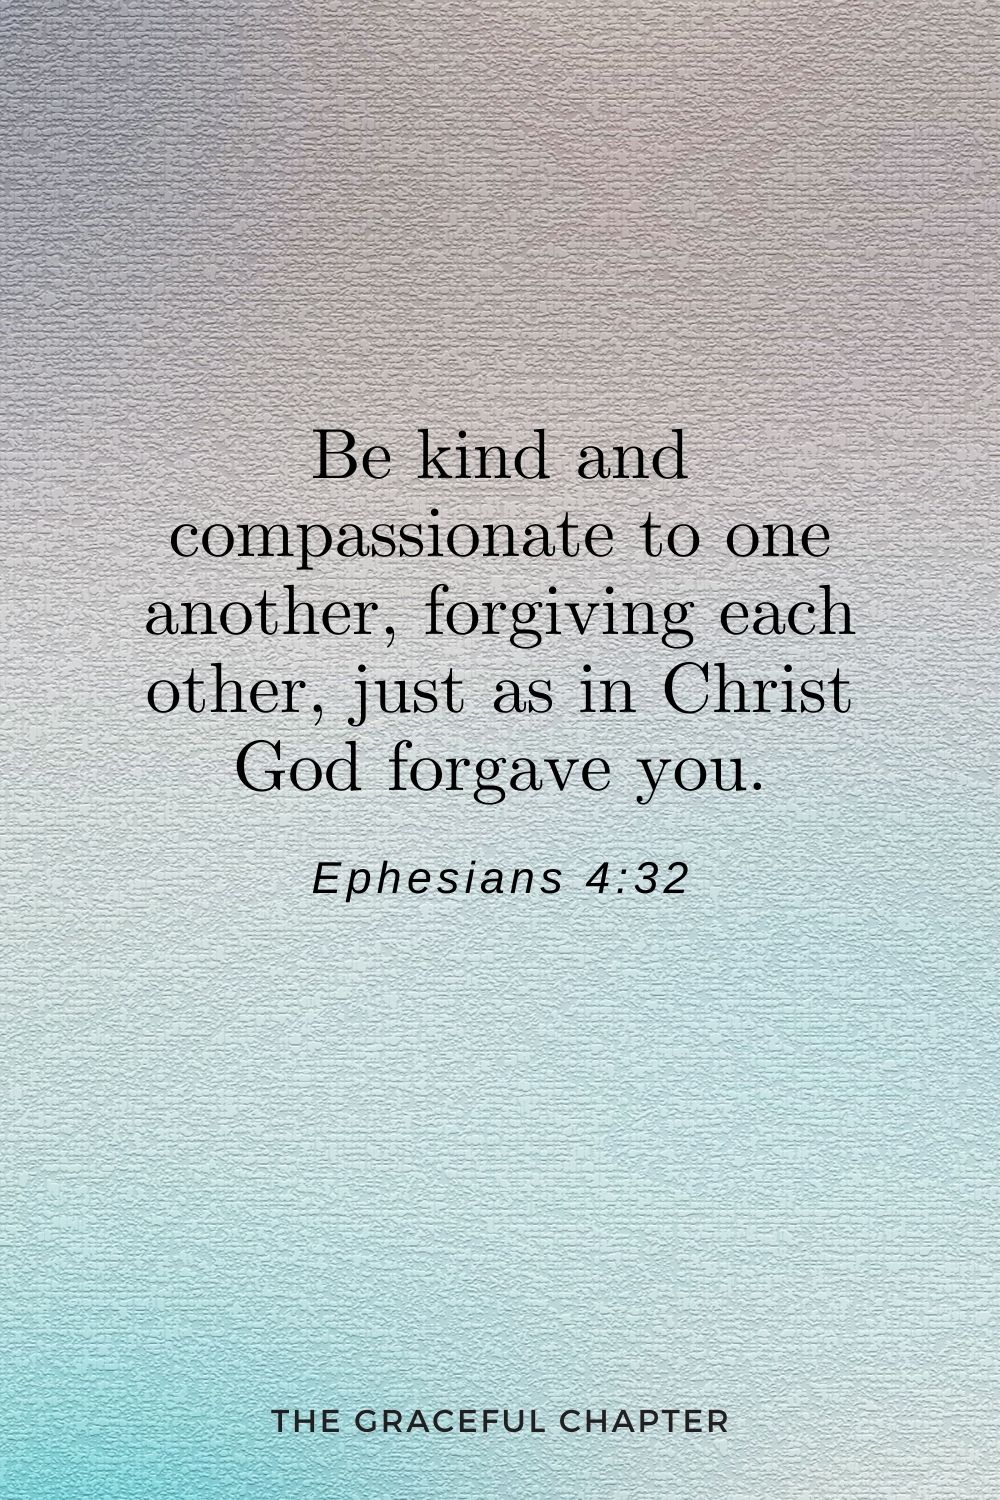 Be kind and compassionate to one another, forgiving each other, just as in Christ God forgave you. Be kind and compassionate to one another, forgiving each other, just as in Christ God forgave you. Ephesians 4:32